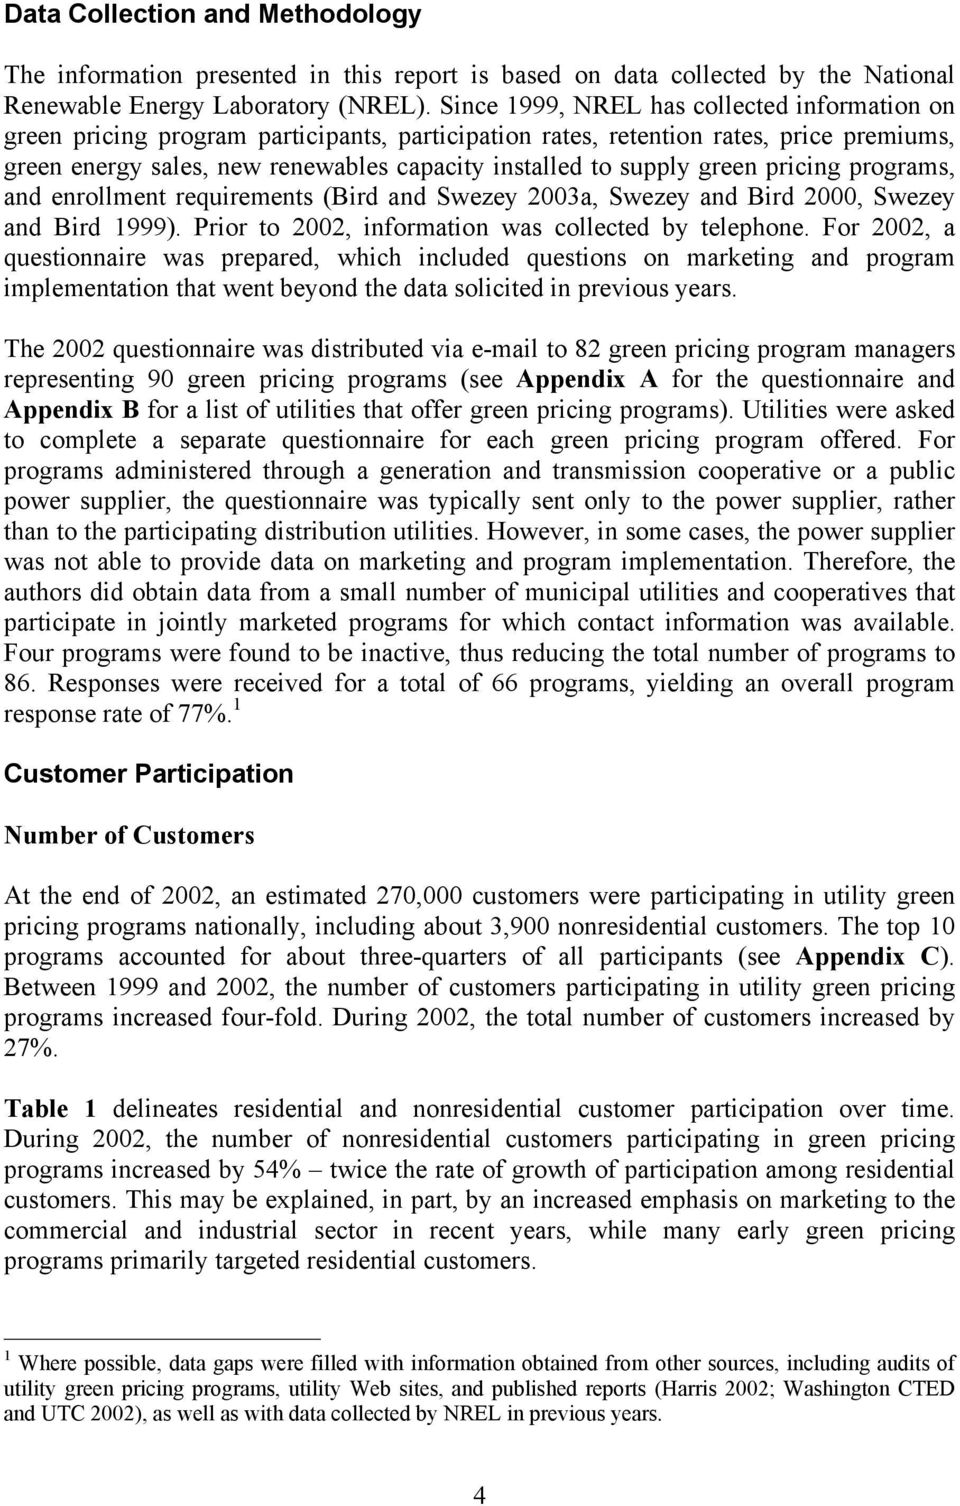 green pricing programs, and enrollment requirements (Bird and Swezey 2003a, Swezey and Bird 2000, Swezey and Bird 1999). Prior to 2002, information was collected by telephone.